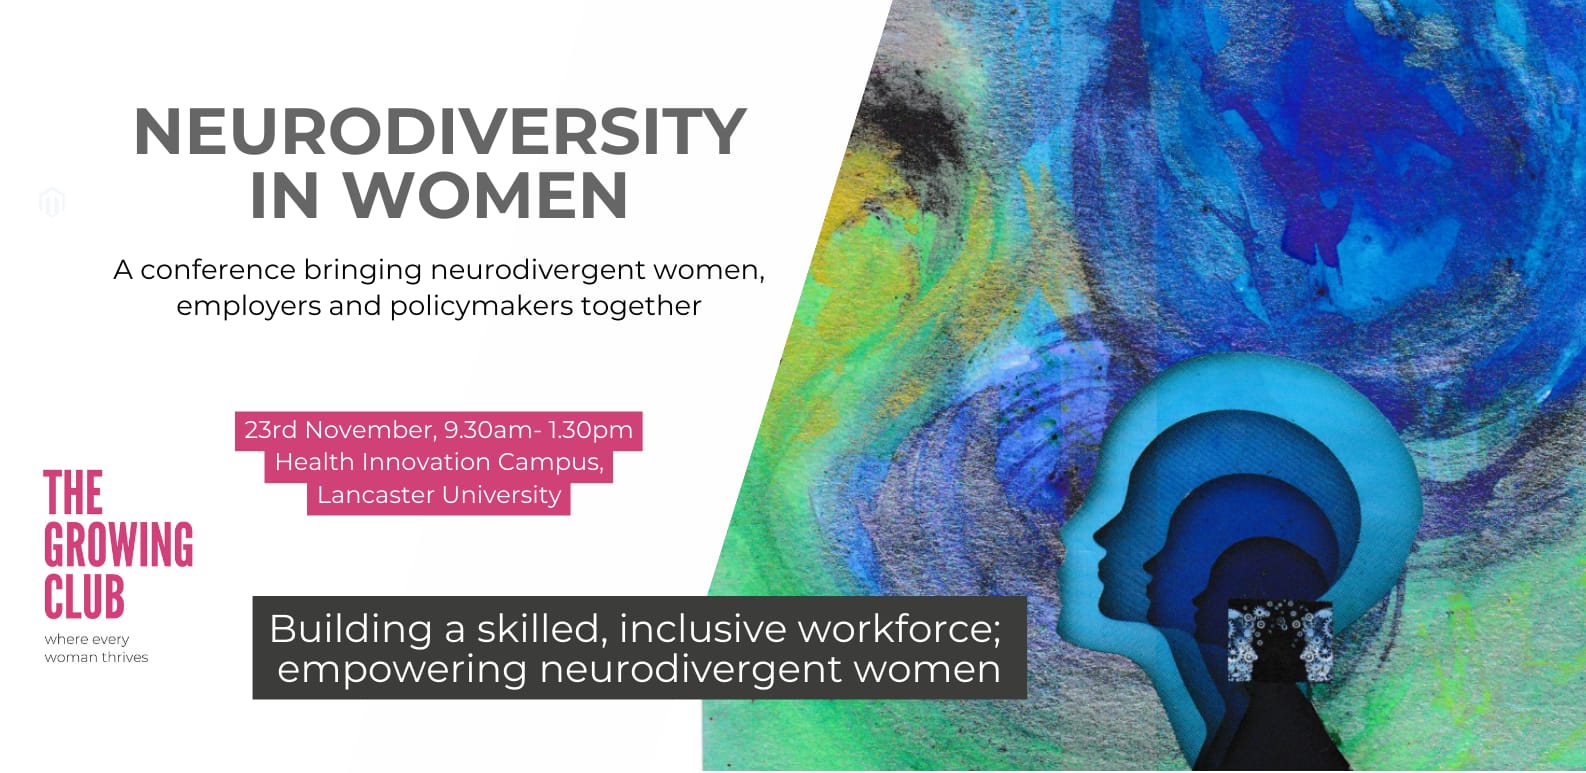 Empowering Neurodivergent Women in the Workplace - A Conference